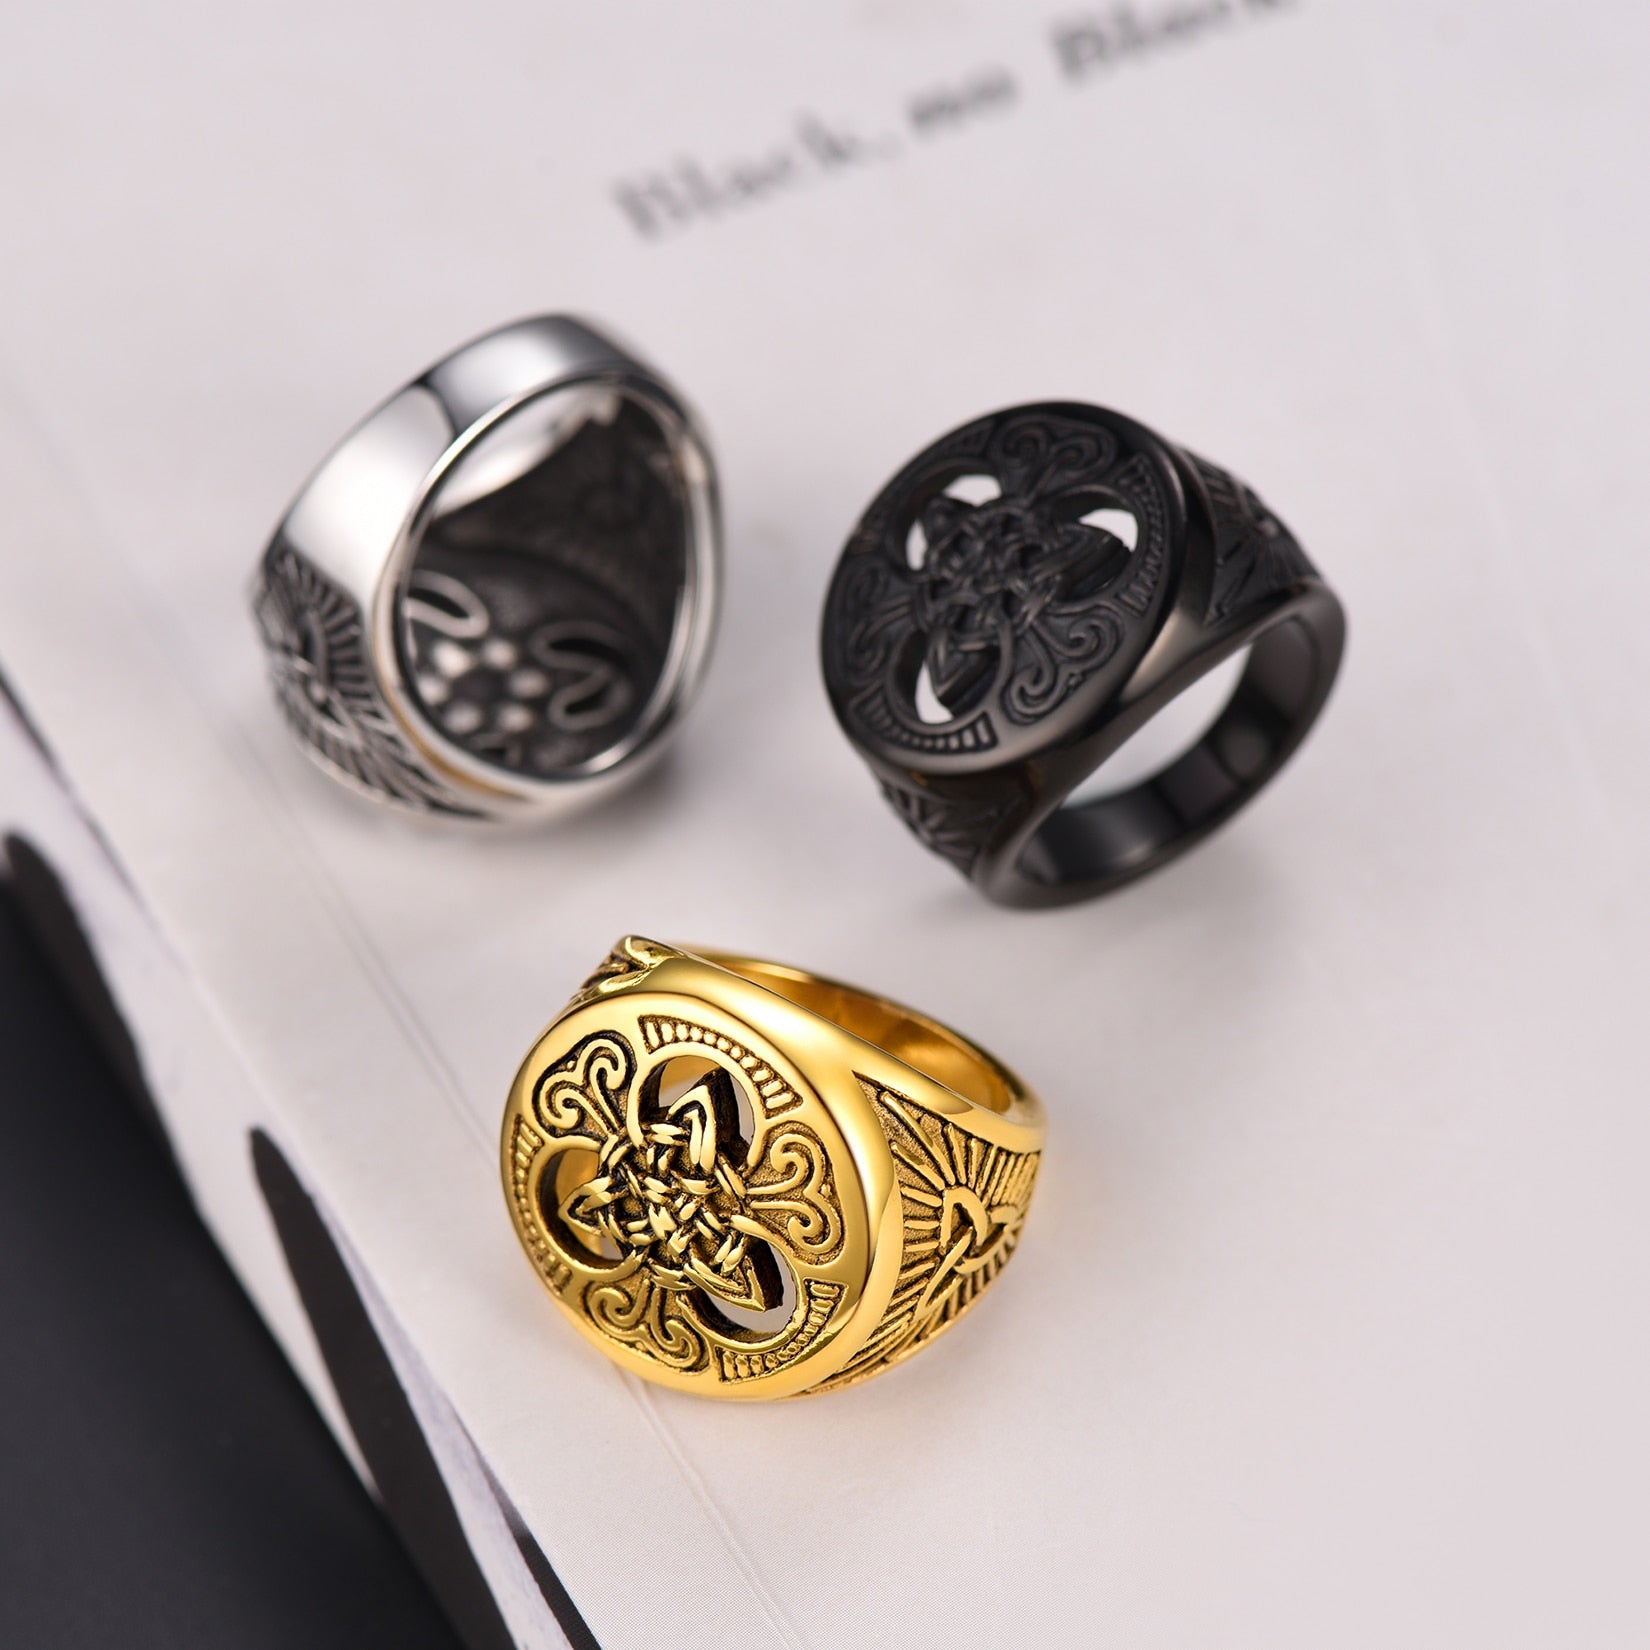 U7 Irish Celtic Knot Ring Antique Black Stainless Steel Triquetra Signet for Men Hip Hop Jewelry Size 7 to 12 R202